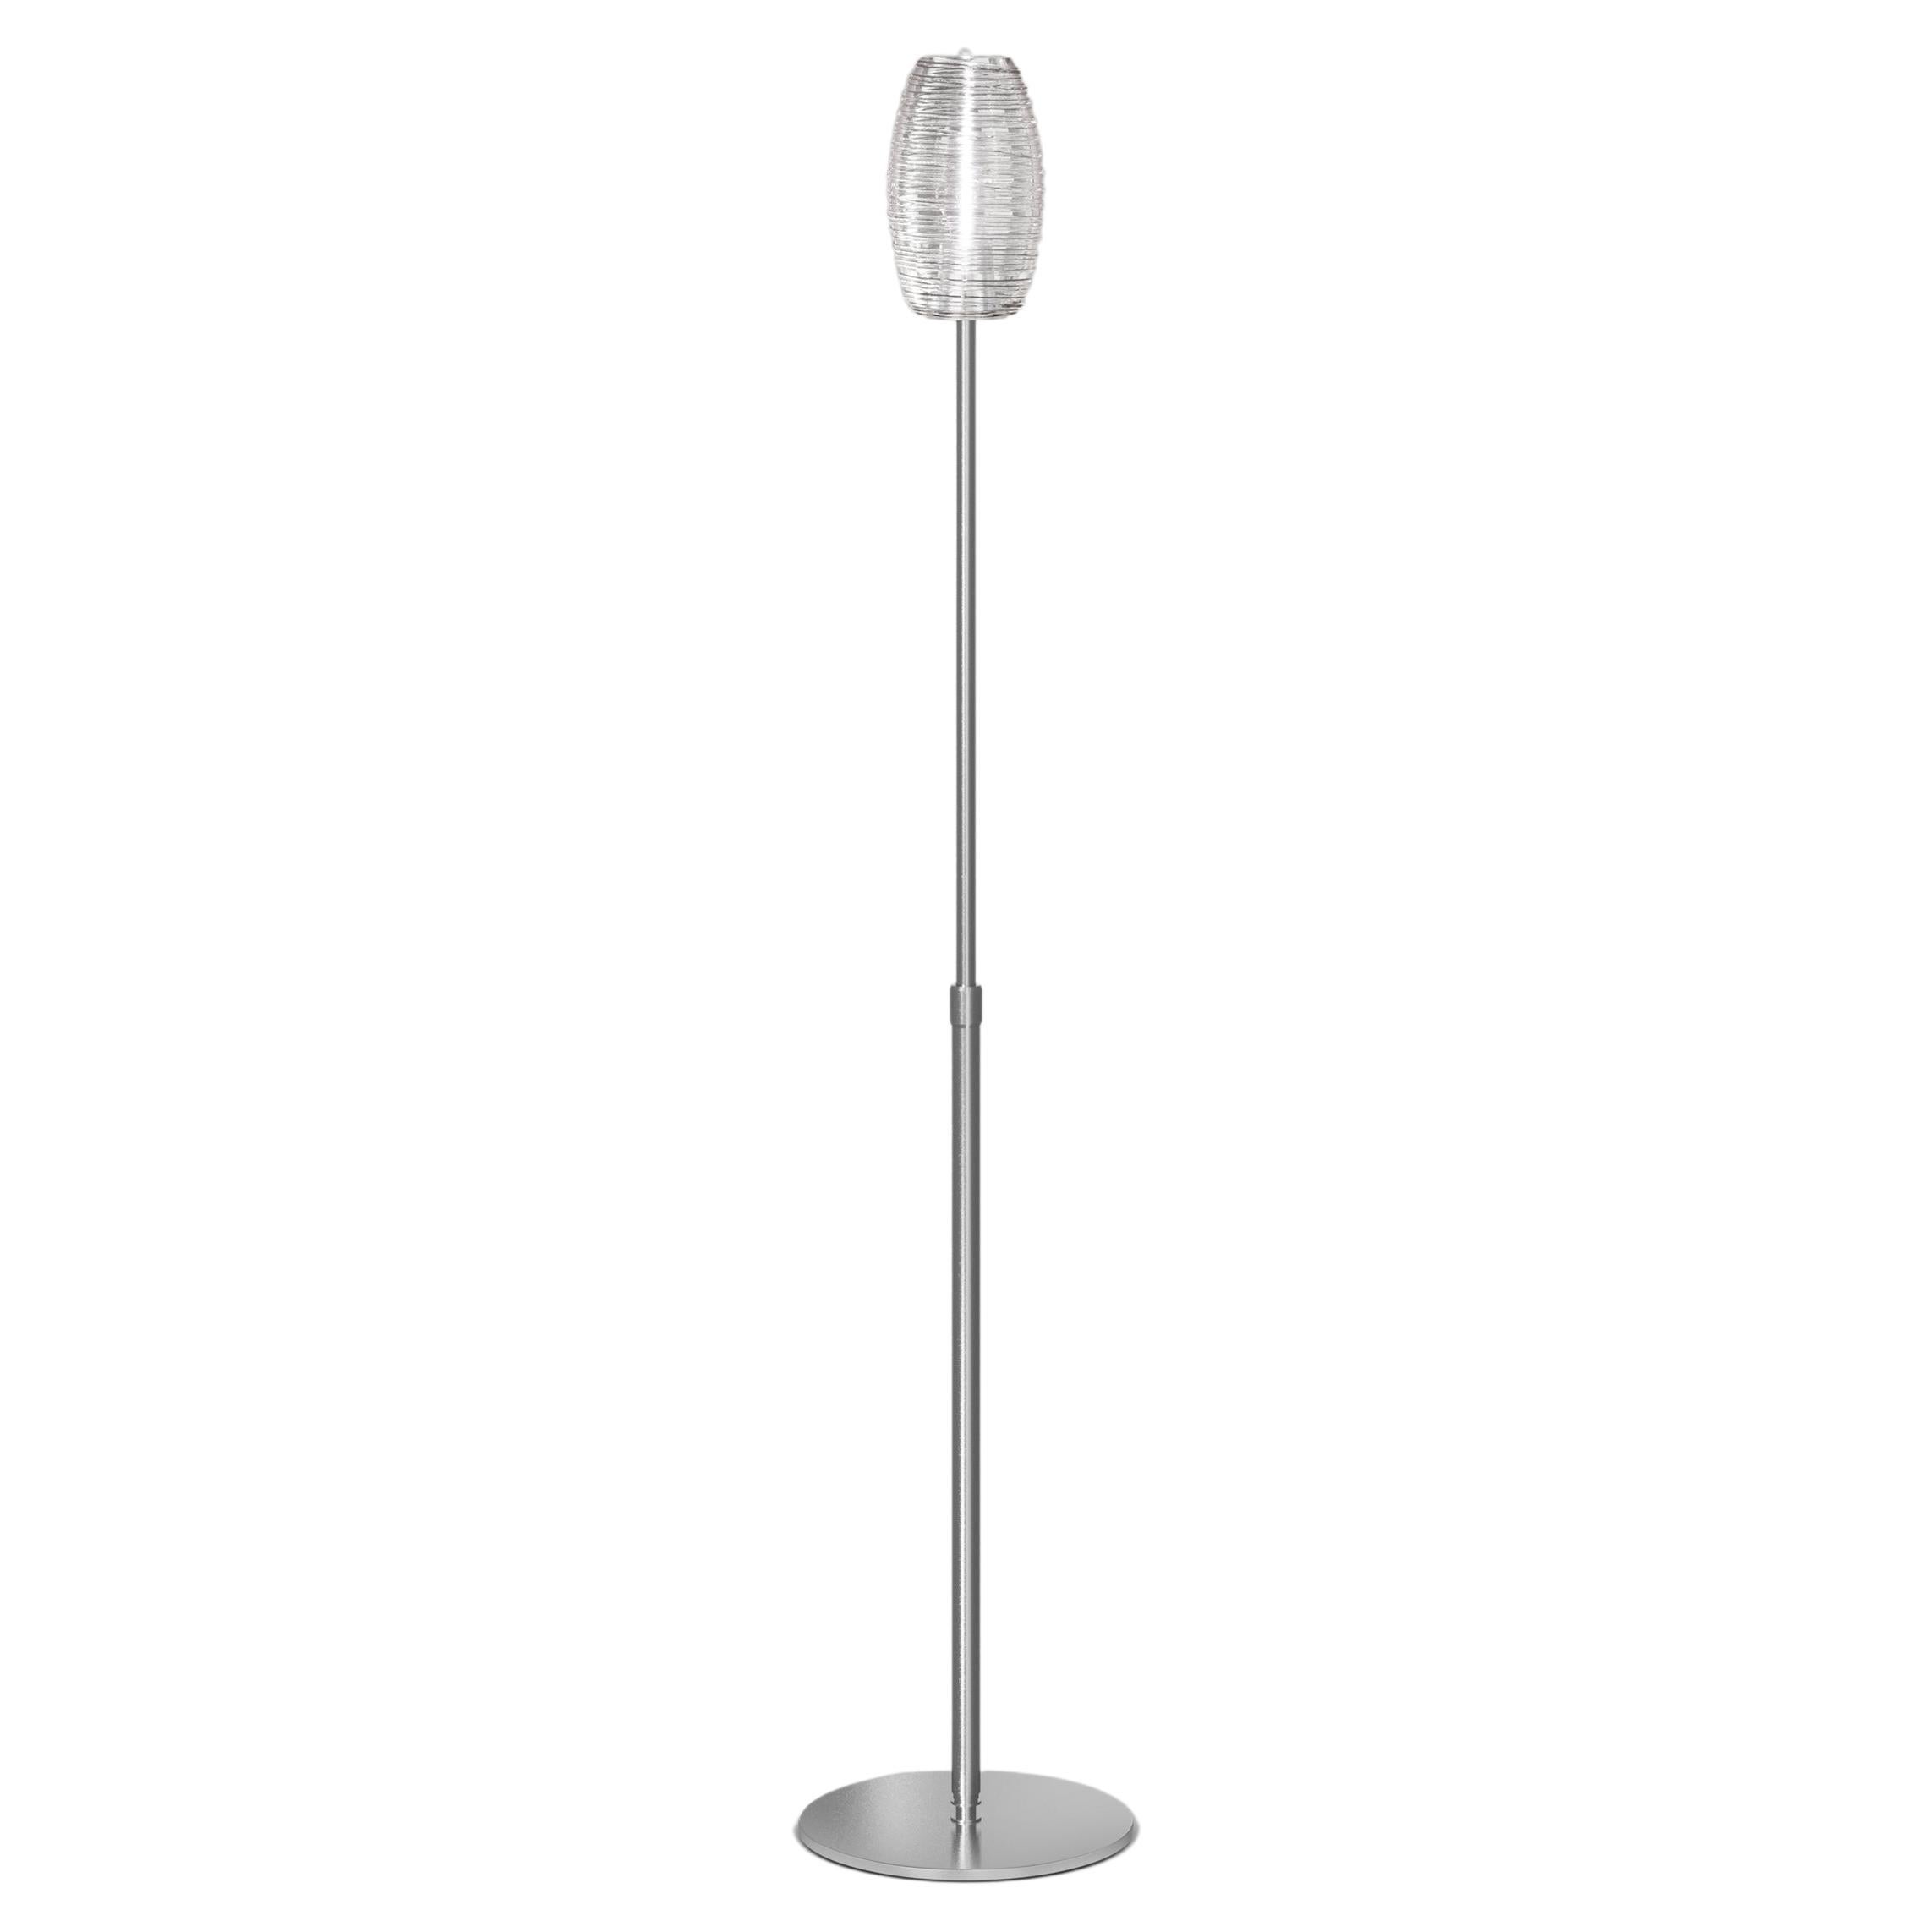 Vistosi Damascus M Floor Lamp in Crystal Crystal by Paolo Crepax